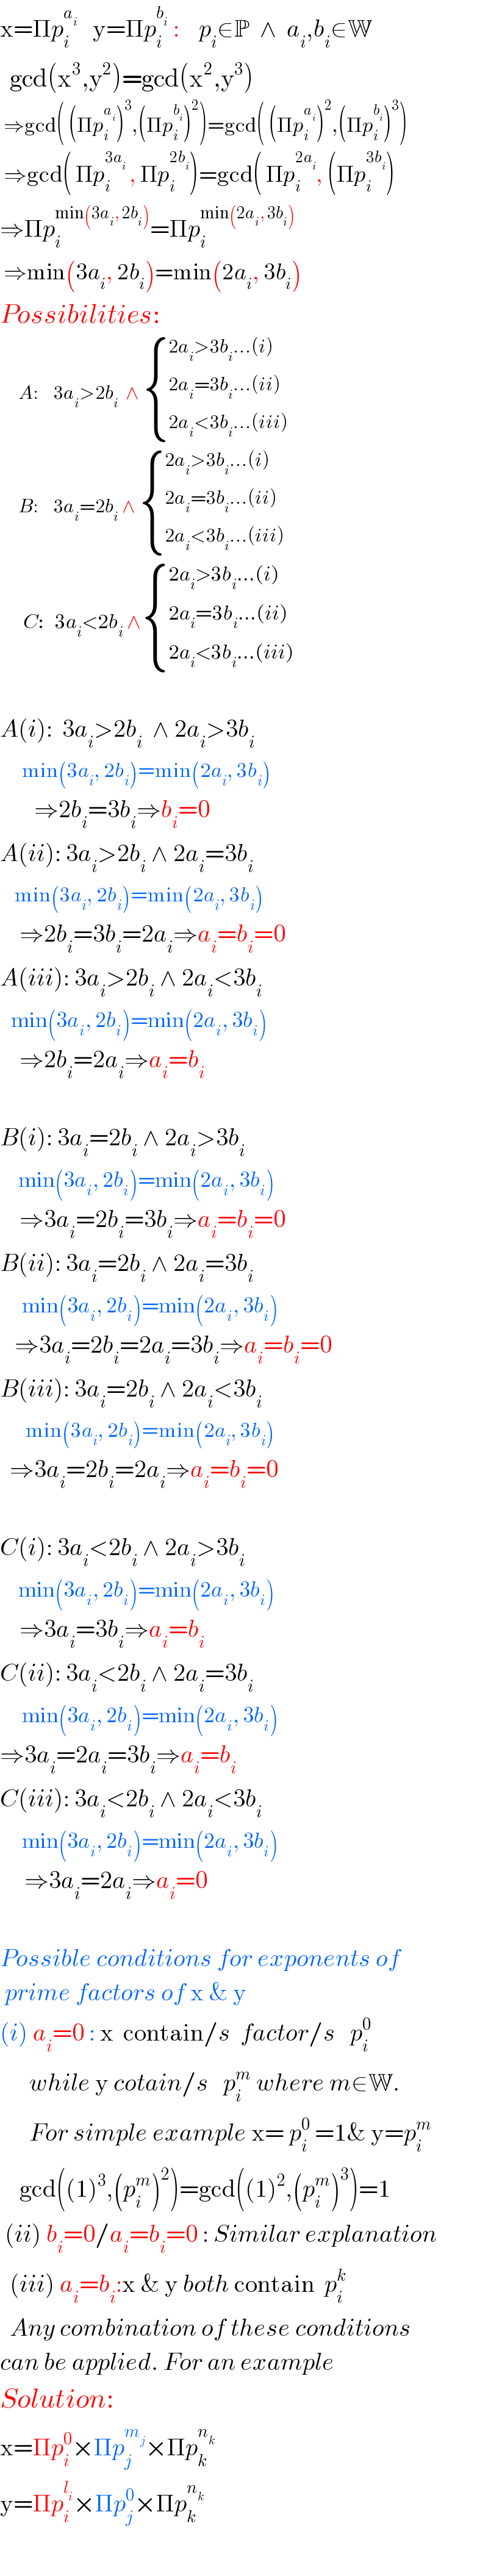 x=Πp_i ^a_i     y=Πp_i ^b_i   :    p_i ∈P  ∧  a_i ,b_i ∈W    gcd(x^3 ,y^2 )=gcd(x^2 ,y^3 )   ⇒gcd( (Πp_i ^a_i  )^3 ,(Πp_i ^b_i  )^2 )=gcd( (Πp_i ^a_i  )^2 ,(Πp_i ^b_i  )^3 )   ⇒gcd( Πp_i ^(3a_i )  , Πp_i ^(2b_i ) )=gcd( Πp_i ^(2a_i ) , (Πp_i ^(3b_i ) )  ⇒Πp_i ^(min(3a_i , 2b_i )) =Πp_i ^(min(2a_i , 3b_i ))    ⇒min(3a_i , 2b_i )=min(2a_i , 3b_i )  Possibilities:       A:    3a_i >2b_i   ∧  { ((2a_i >3b_i ...(i))),((2a_i =3b_i ...(ii))),((2a_i <3b_i ...(iii))) :}       B:    3a_i =2b_i  ∧  { ((2a_i >3b_i ...(i))),((2a_i =3b_i ...(ii))),((2a_i <3b_i ...(iii))) :}   _     C:   3a_i <2b_i  ∧ { ((2a_i >3b_i ...(i))),((2a_i =3b_i ...(ii))),((2a_i <3b_i ...(iii))) :}    A(i):  3a_i >2b_i   ∧ 2a_i >3b_i         min(3a_i , 2b_i )=min(2a_i , 3b_i )         ⇒2b_i =3b_i ⇒b_i =0  A(ii): 3a_i >2b_i  ∧ 2a_i =3b_i       min(3a_i , 2b_i )=min(2a_i , 3b_i )      ⇒2b_i =3b_i =2a_i ⇒a_i =b_i =0  A(iii): 3a_i >2b_i  ∧ 2a_i <3b_i      min(3a_i , 2b_i )=min(2a_i , 3b_i )      ⇒2b_i =2a_i ⇒a_i =b_i     B(i): 3a_i =2b_i  ∧ 2a_i >3b_i        min(3a_i , 2b_i )=min(2a_i , 3b_i )      ⇒3a_i =2b_i =3b_i ⇒a_i =b_i =0  B(ii): 3a_i =2b_i  ∧ 2a_i =3b_i         min(3a_i , 2b_i )=min(2a_i , 3b_i )     ⇒3a_i =2b_i =2a_i =3b_i ⇒a_i =b_i =0  B(iii): 3a_i =2b_i  ∧ 2a_i <3b_i          min(3a_i , 2b_i )=min(2a_i , 3b_i )    ⇒3a_i =2b_i =2a_i ⇒a_i =b_i =0    C(i): 3a_i <2b_i  ∧ 2a_i >3b_i        min(3a_i , 2b_i )=min(2a_i , 3b_i )      ⇒3a_i =3b_i ⇒a_i =b_i   C(ii): 3a_i <2b_i  ∧ 2a_i =3b_i         min(3a_i , 2b_i )=min(2a_i , 3b_i )  ⇒3a_i =2a_i =3b_i ⇒a_i =b_i   C(iii): 3a_i <2b_i  ∧ 2a_i <3b_i         min(3a_i , 2b_i )=min(2a_i , 3b_i )       ⇒3a_i =2a_i ⇒a_i =0    Possible conditions for exponents of   prime factors of x & y  (i) a_i =0 : x  contain/s  factor/s   p_i ^0         while y cotain/s   p_i ^m  where m∈W.        For simple example x= p_i ^0  =1& y=p_i ^m       gcd((1)^3 ,(p_i ^m )^2 )=gcd((1)^2 ,(p_i ^m )^3 )=1   (ii) b_i =0/a_i =b_i =0 : Similar explanation    (iii) a_i =b_i :x & y both contain  p_i ^k     Any combination of these conditions  can be applied. For an example  Solution:  x=Πp_i ^0 ×Πp_j ^m_j  ×Πp_k ^n_k    y=Πp_i ^l_i  ×Πp_j ^0 ×Πp_k ^n_k      